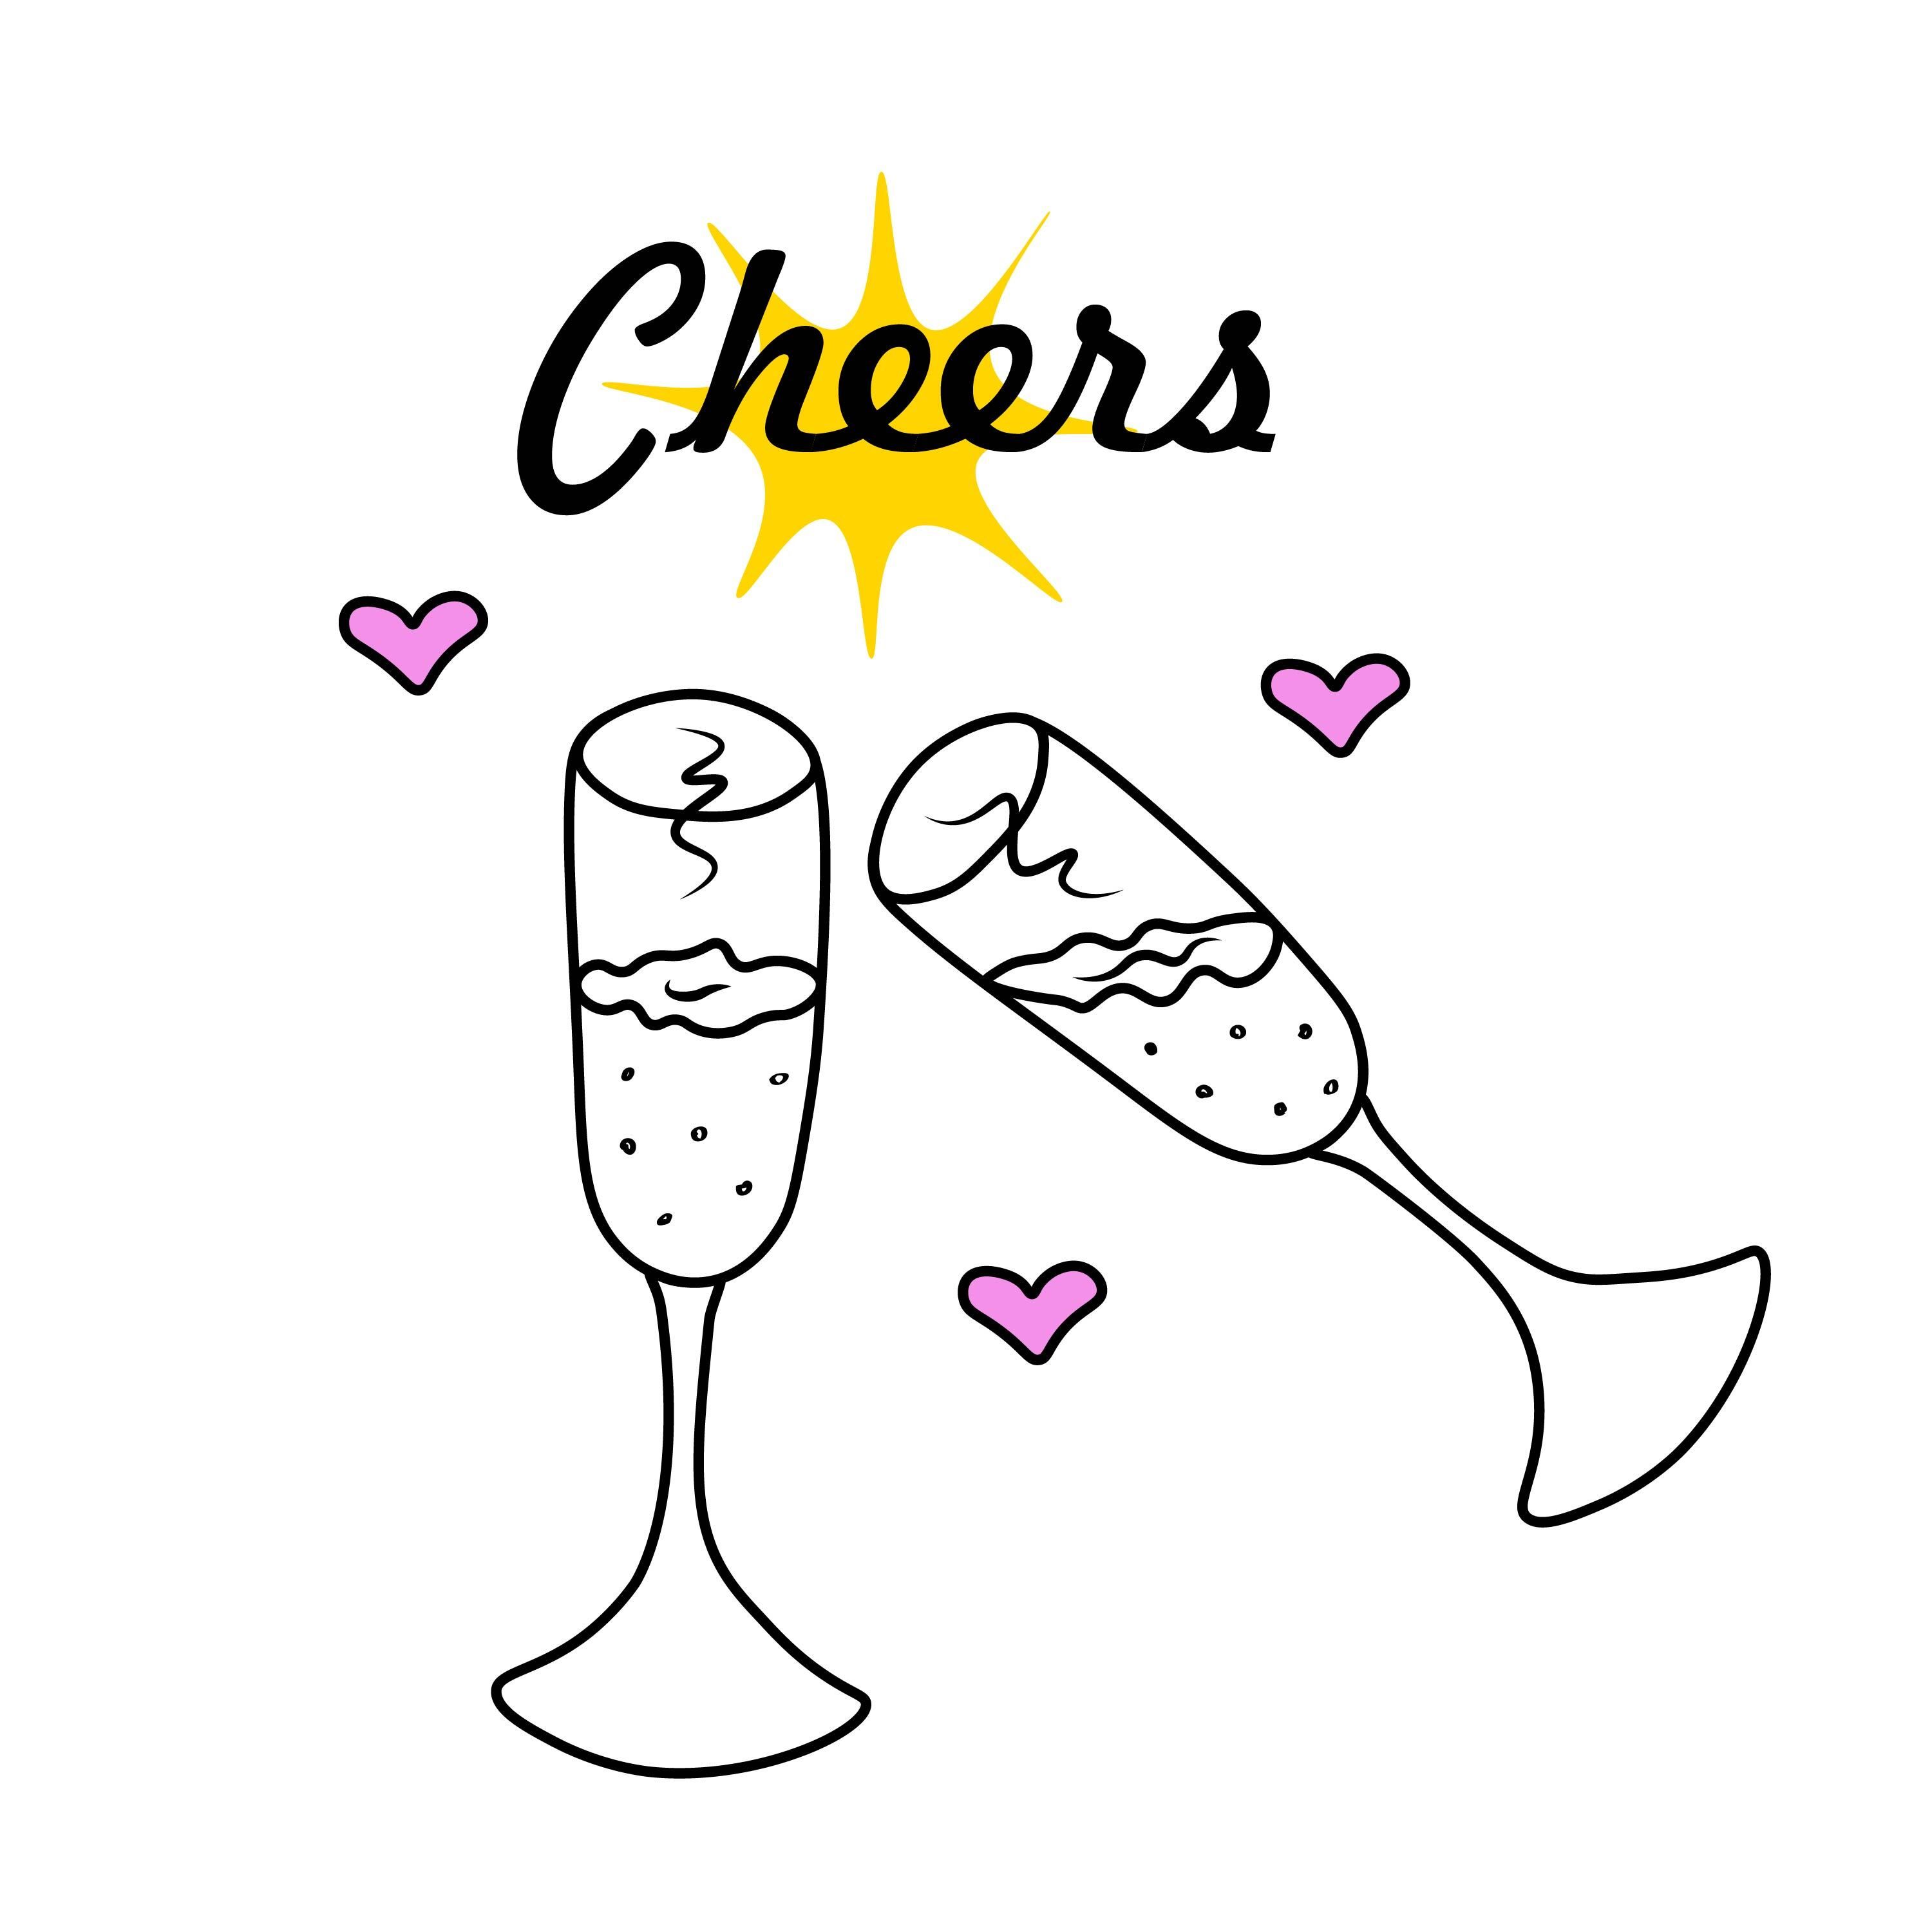 Cheers. Two champagne glasses. Illustration for printing, background, wallpaper, covers, packaging, greeting cards, posters, stickers, textile, seasonal design. Isolated on white background